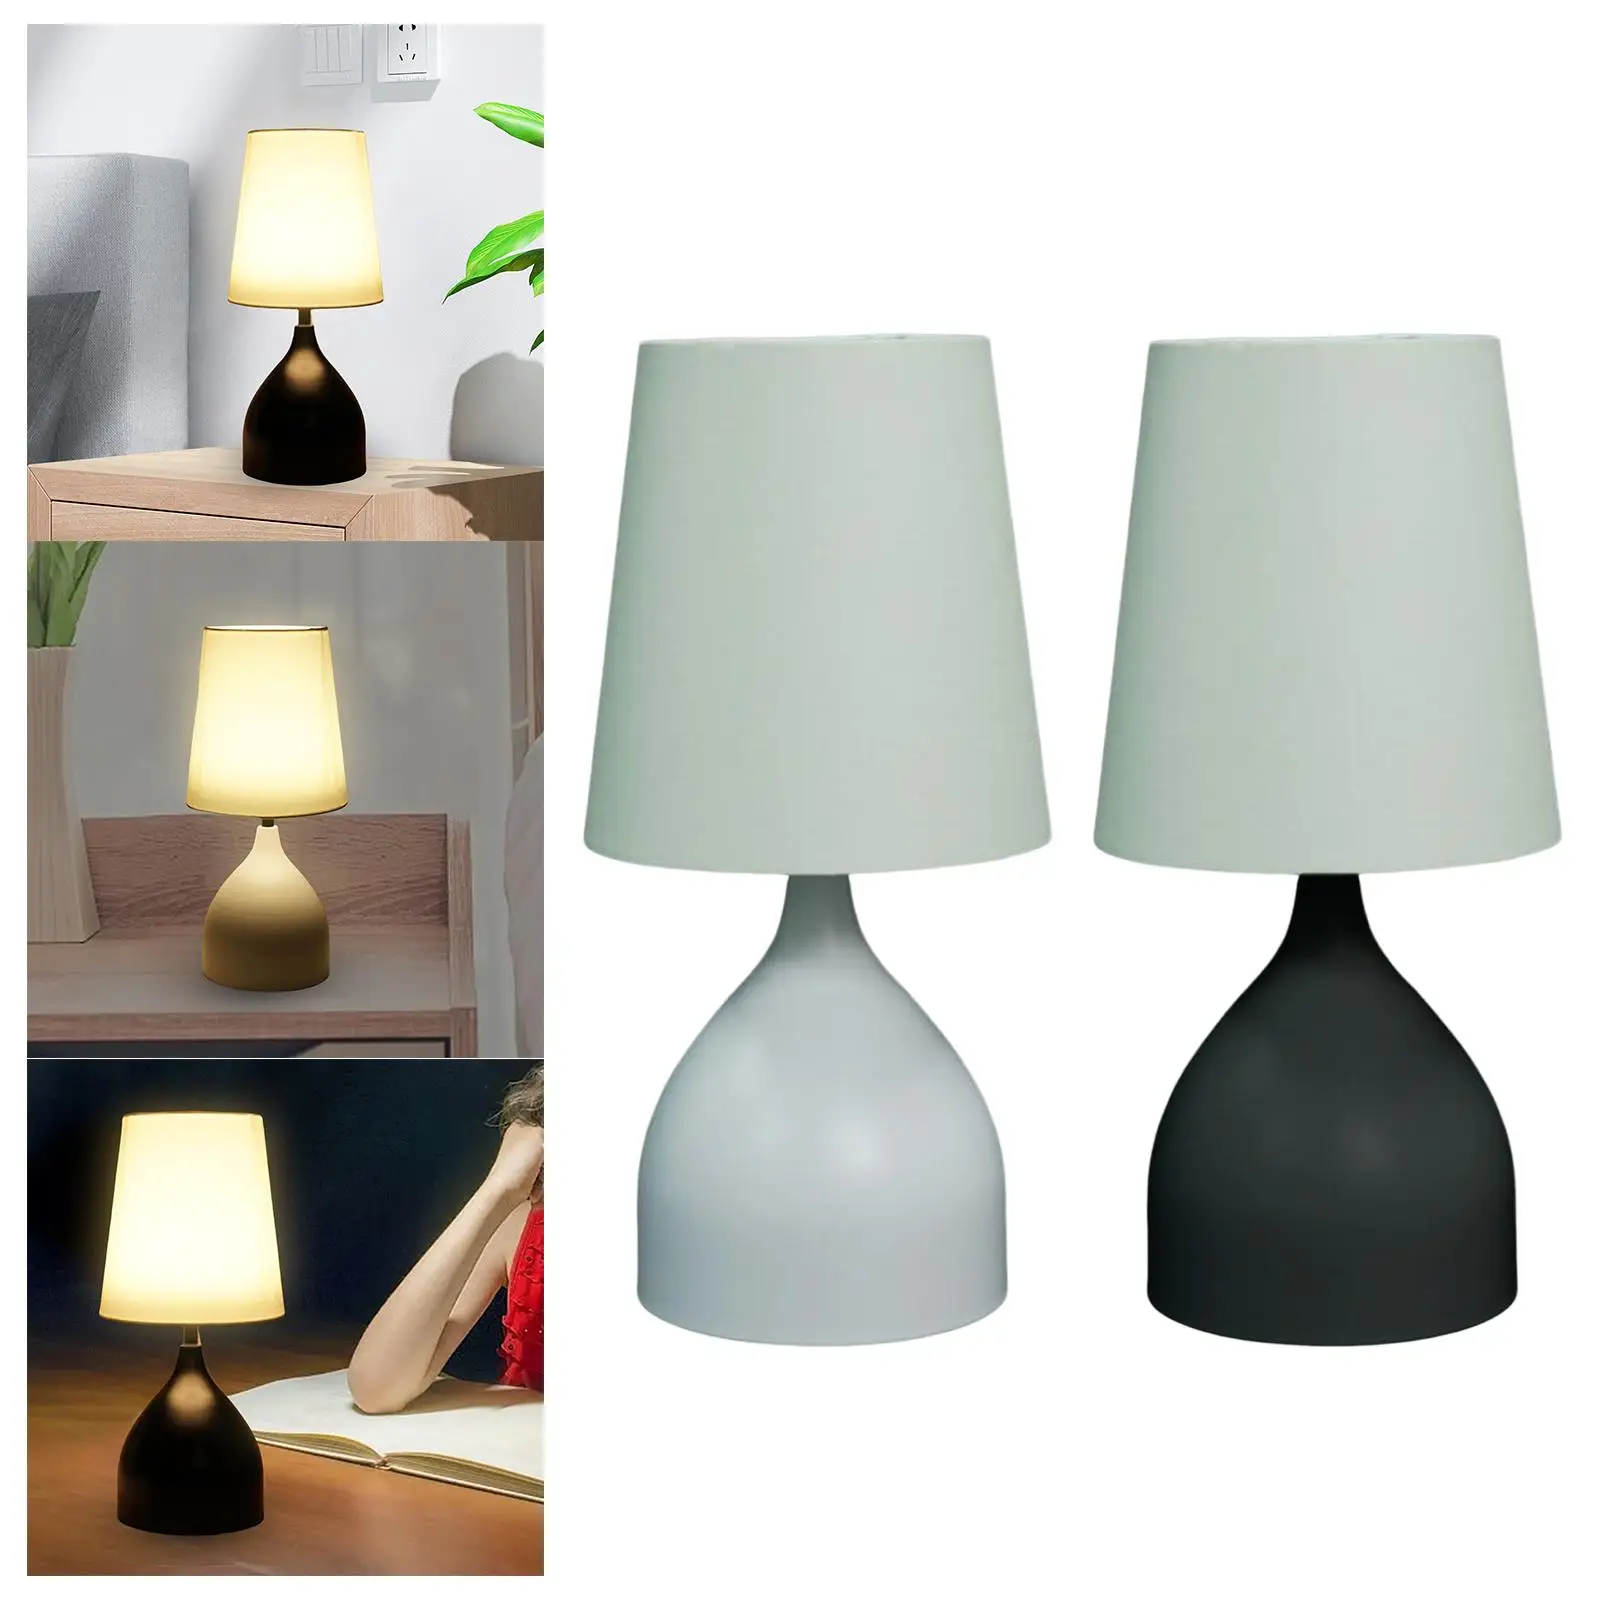 Traditional Bedside Lamp Button desk Lamp for Hotel Home Decoration